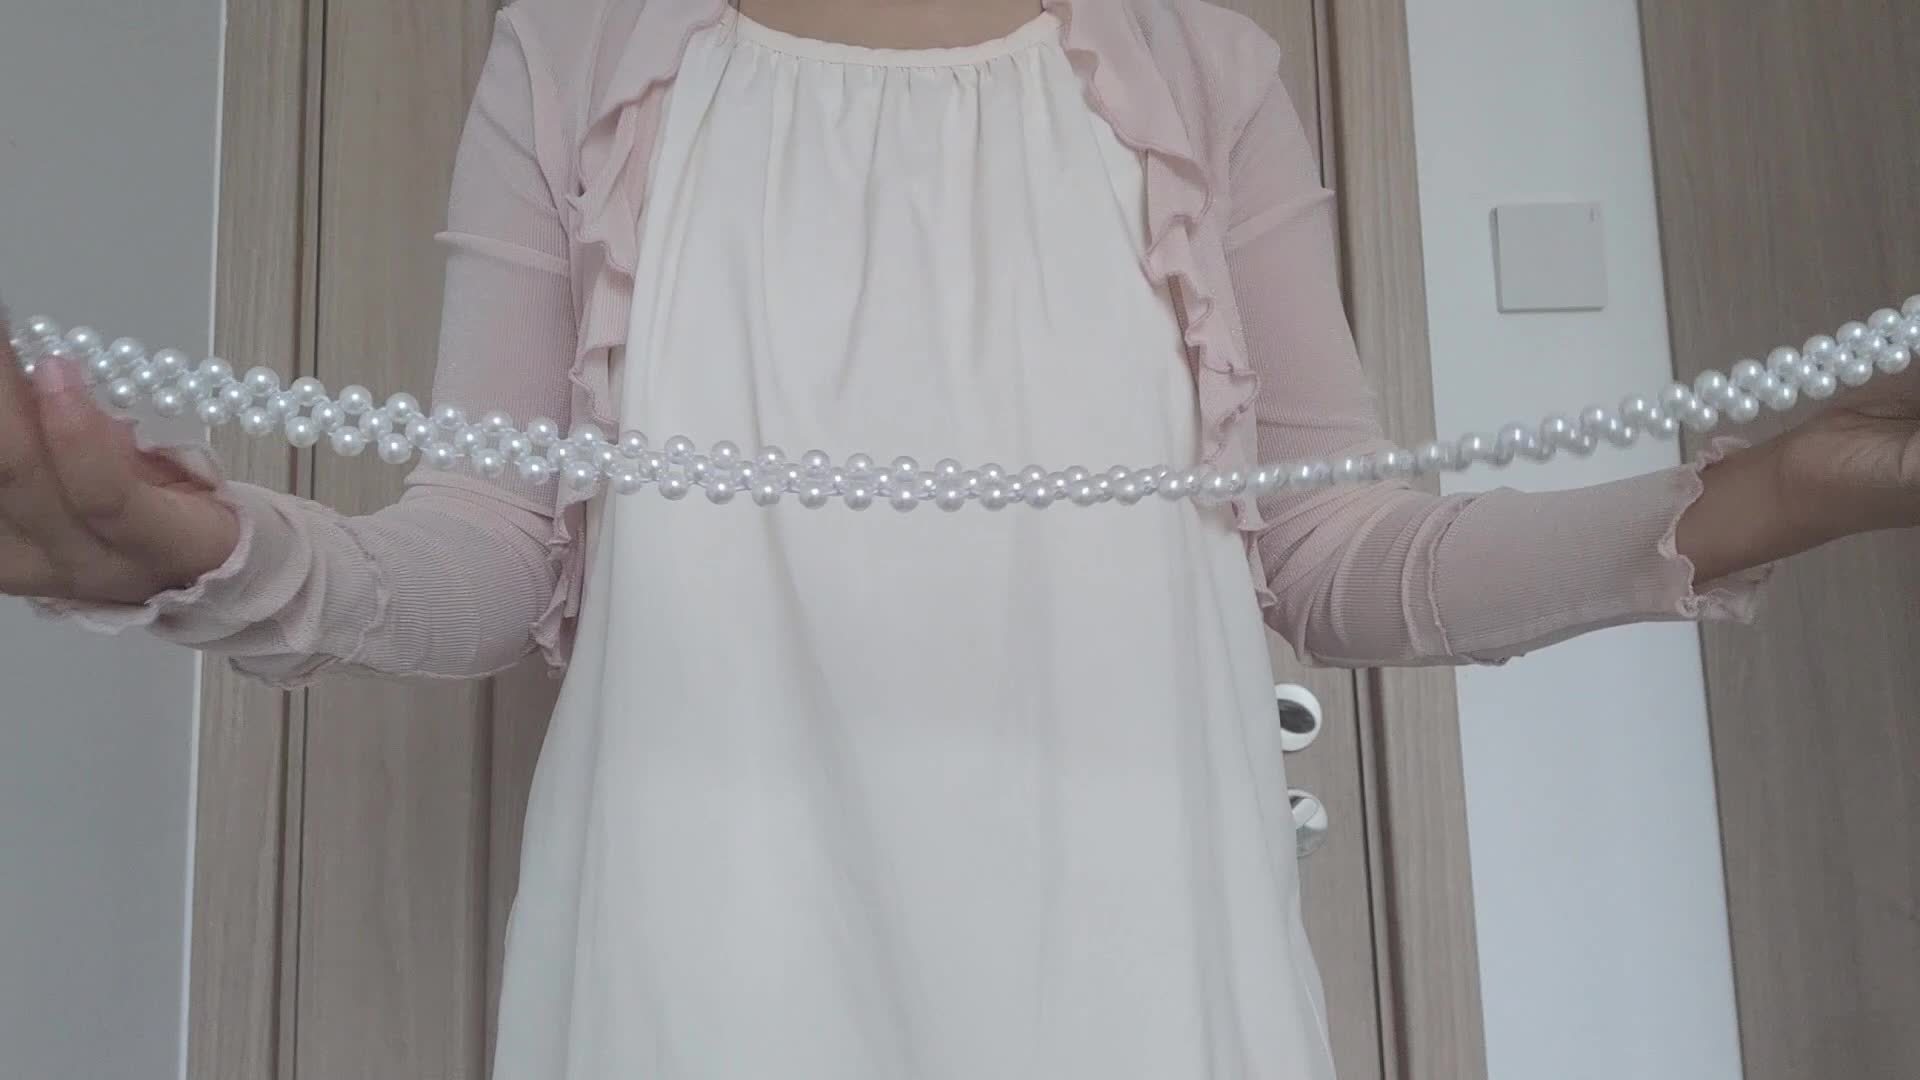 Crystal Pearl Waist Belt For Women Elegant Elastic Buckle With Chain For  Baby Shower Dresses And Special Occasions From Swkfactory_store, $1.9